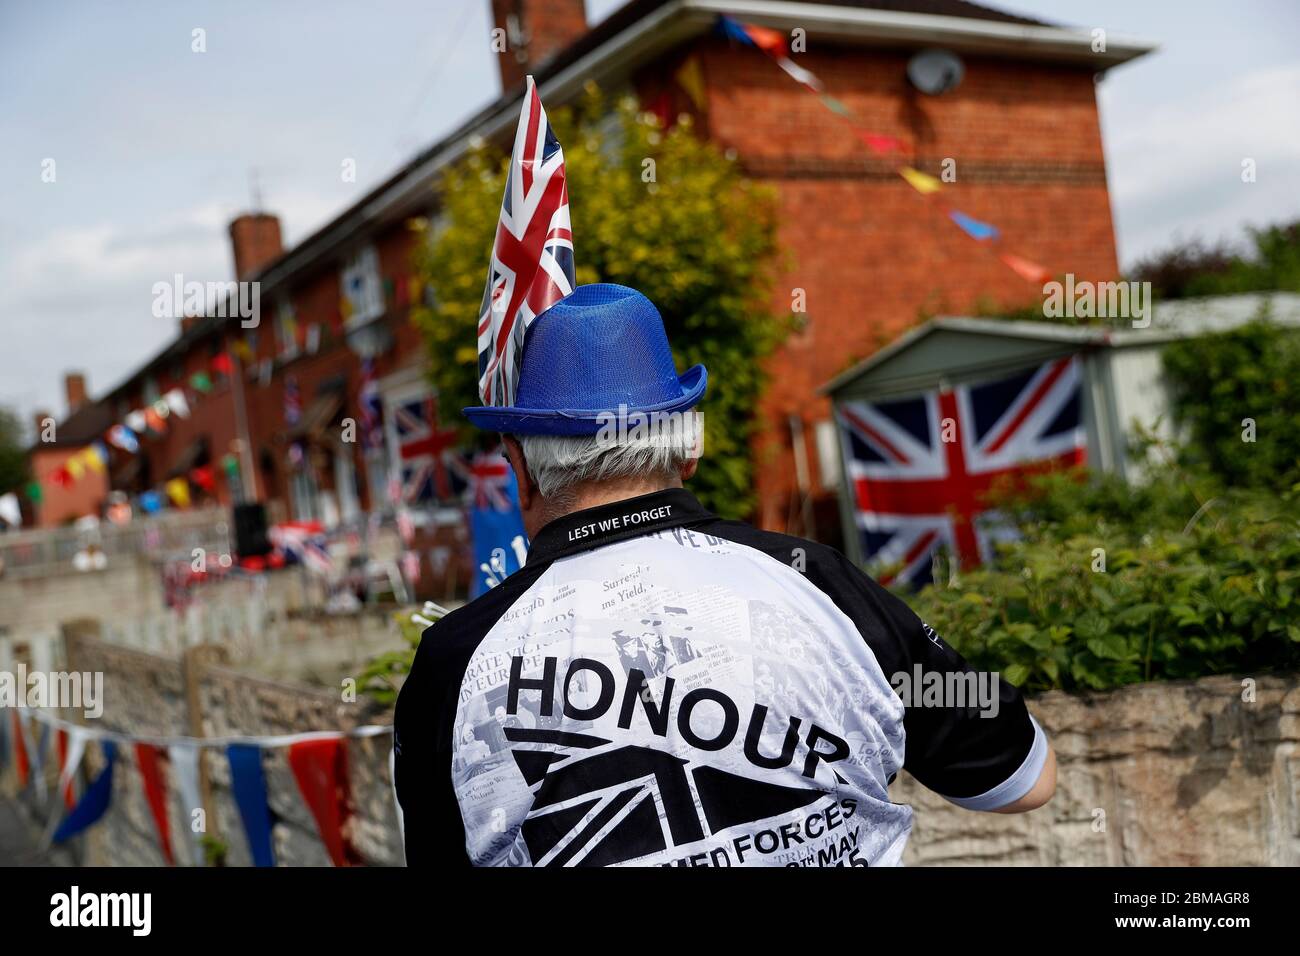 Loughborough, Leicestershire, UK. 8th May 2020. Mick Wells hangs up bunting before the two minutes silence as the nation marks the 75th anniversary of VE day during the coronavirus pandemic lockdown. Credit Darren Staples/Alamy Live News. Stock Photo